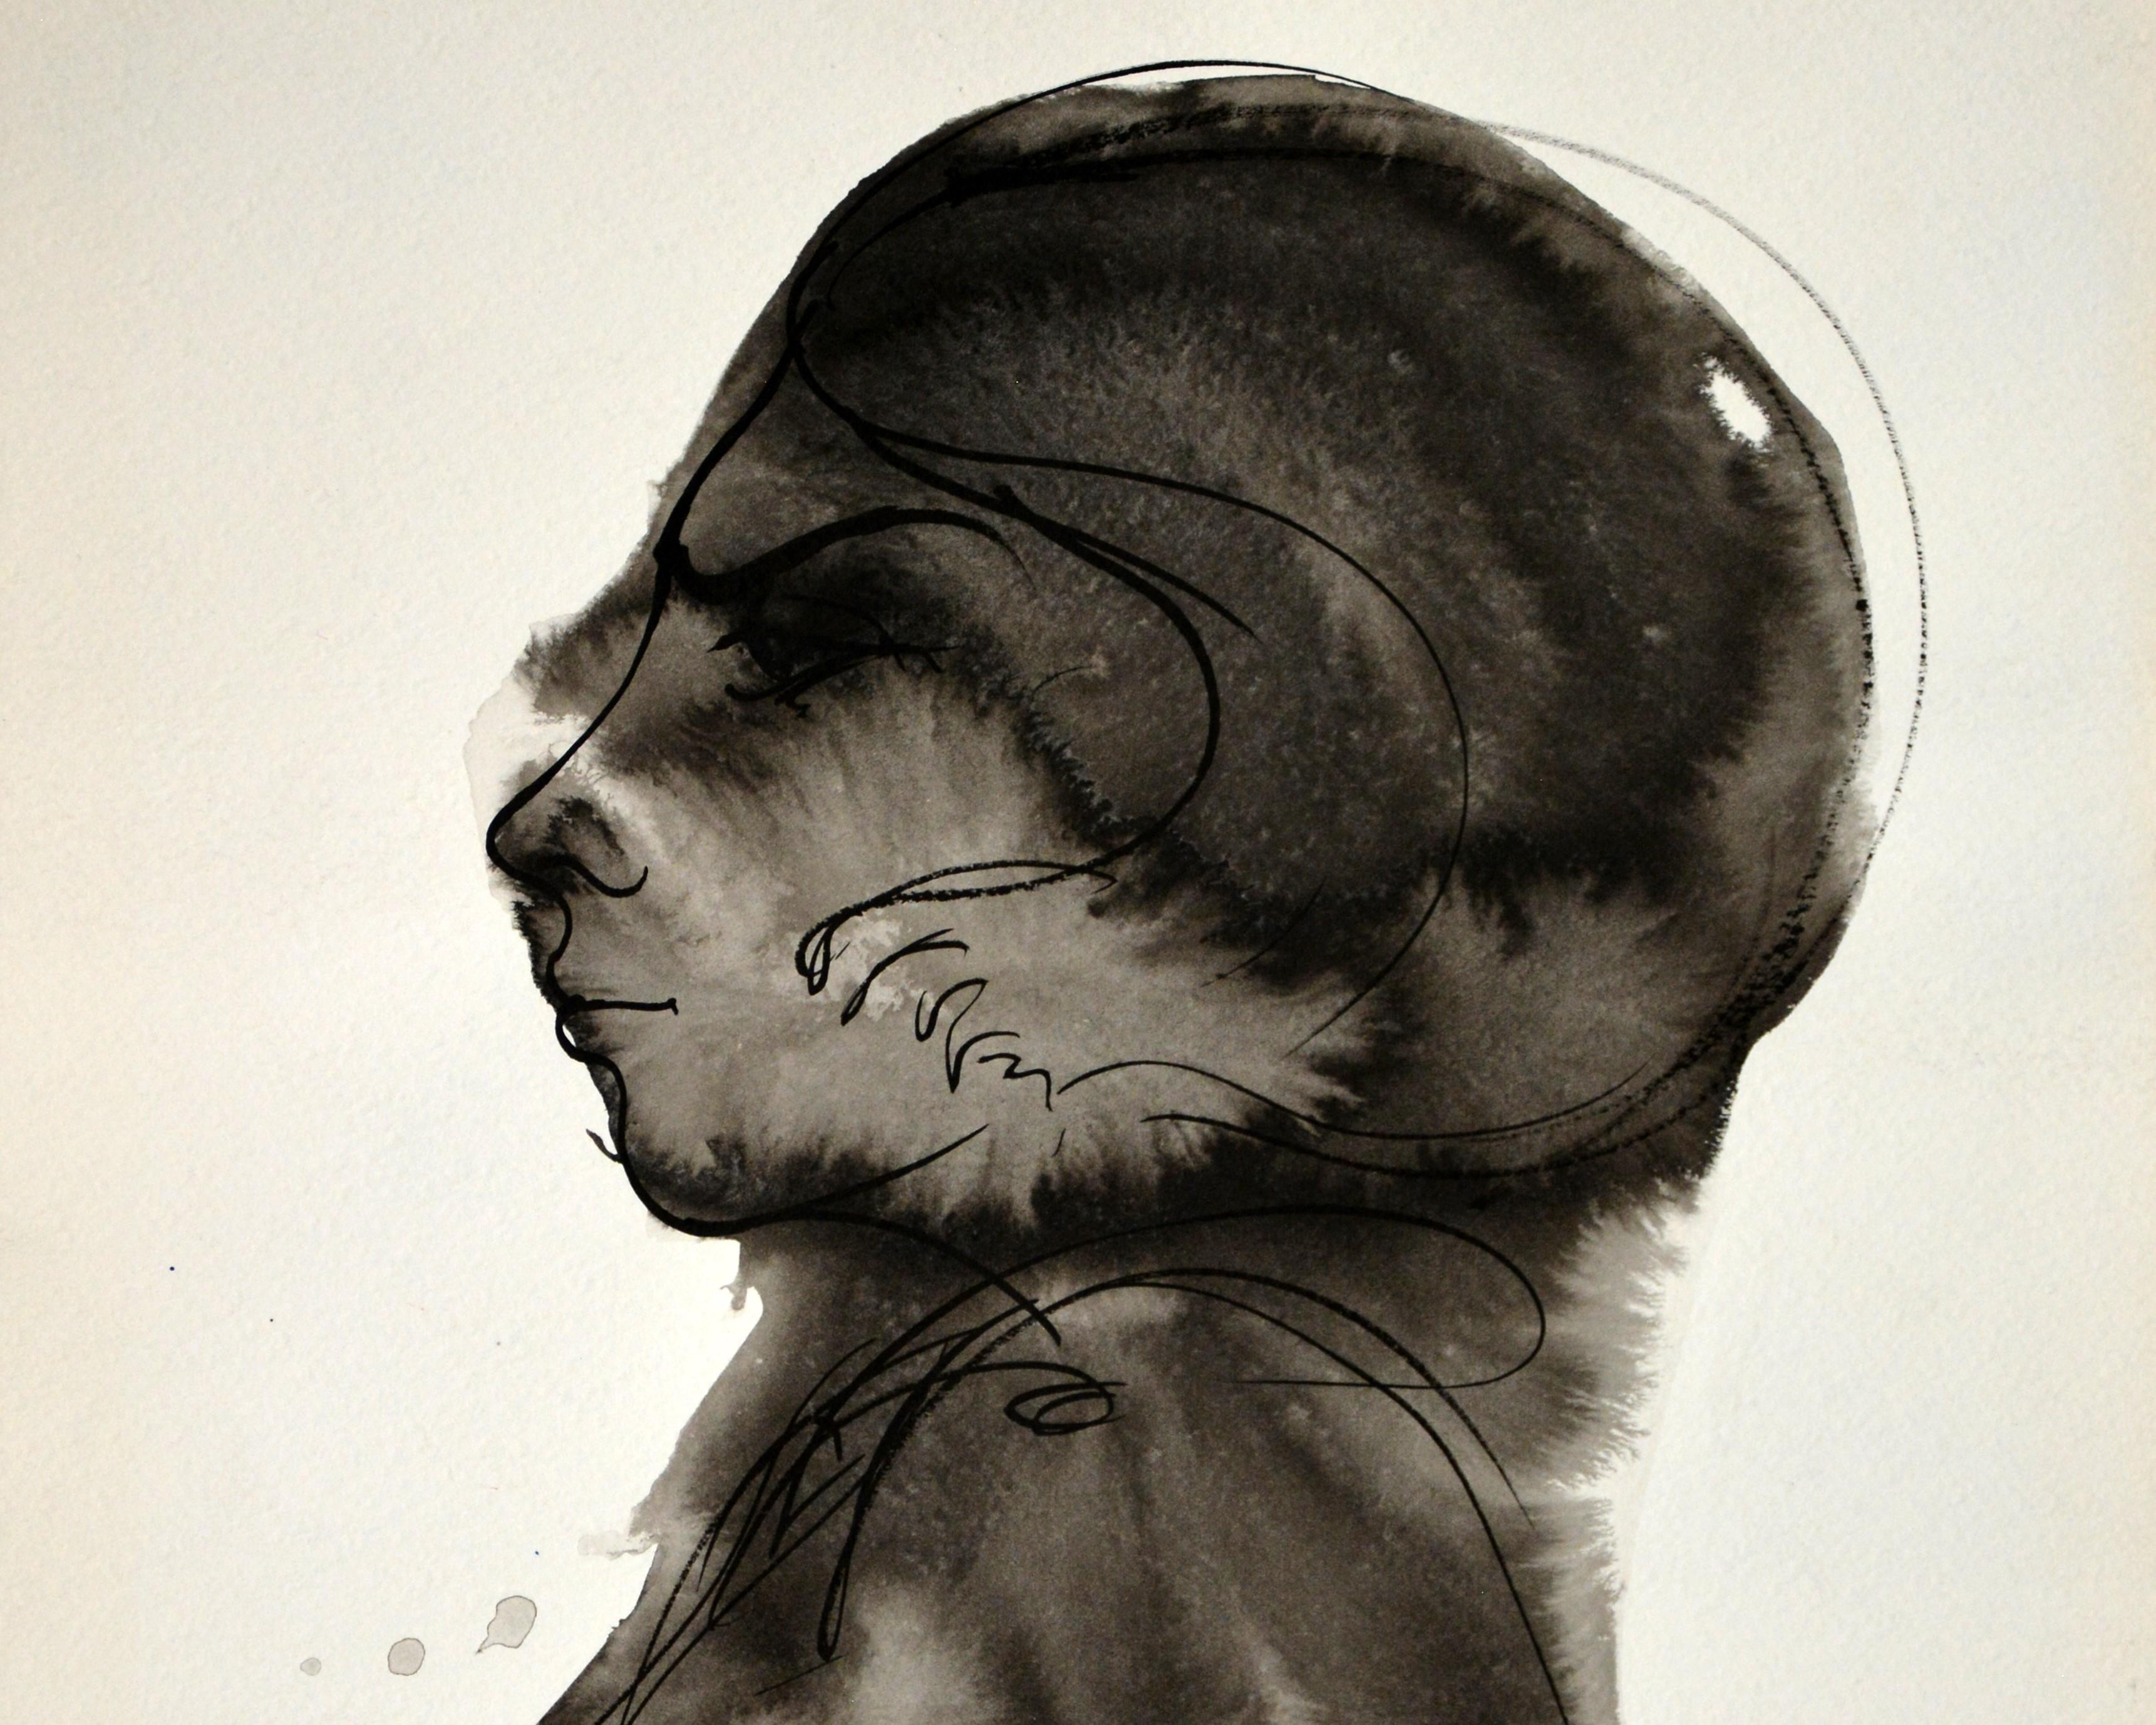 Luis Miguel Valdes, ¨Perfil-1¨, 1999, Work on paper, 15.7x11.8 in - Contemporary Art by Luis Miguel Valdes 